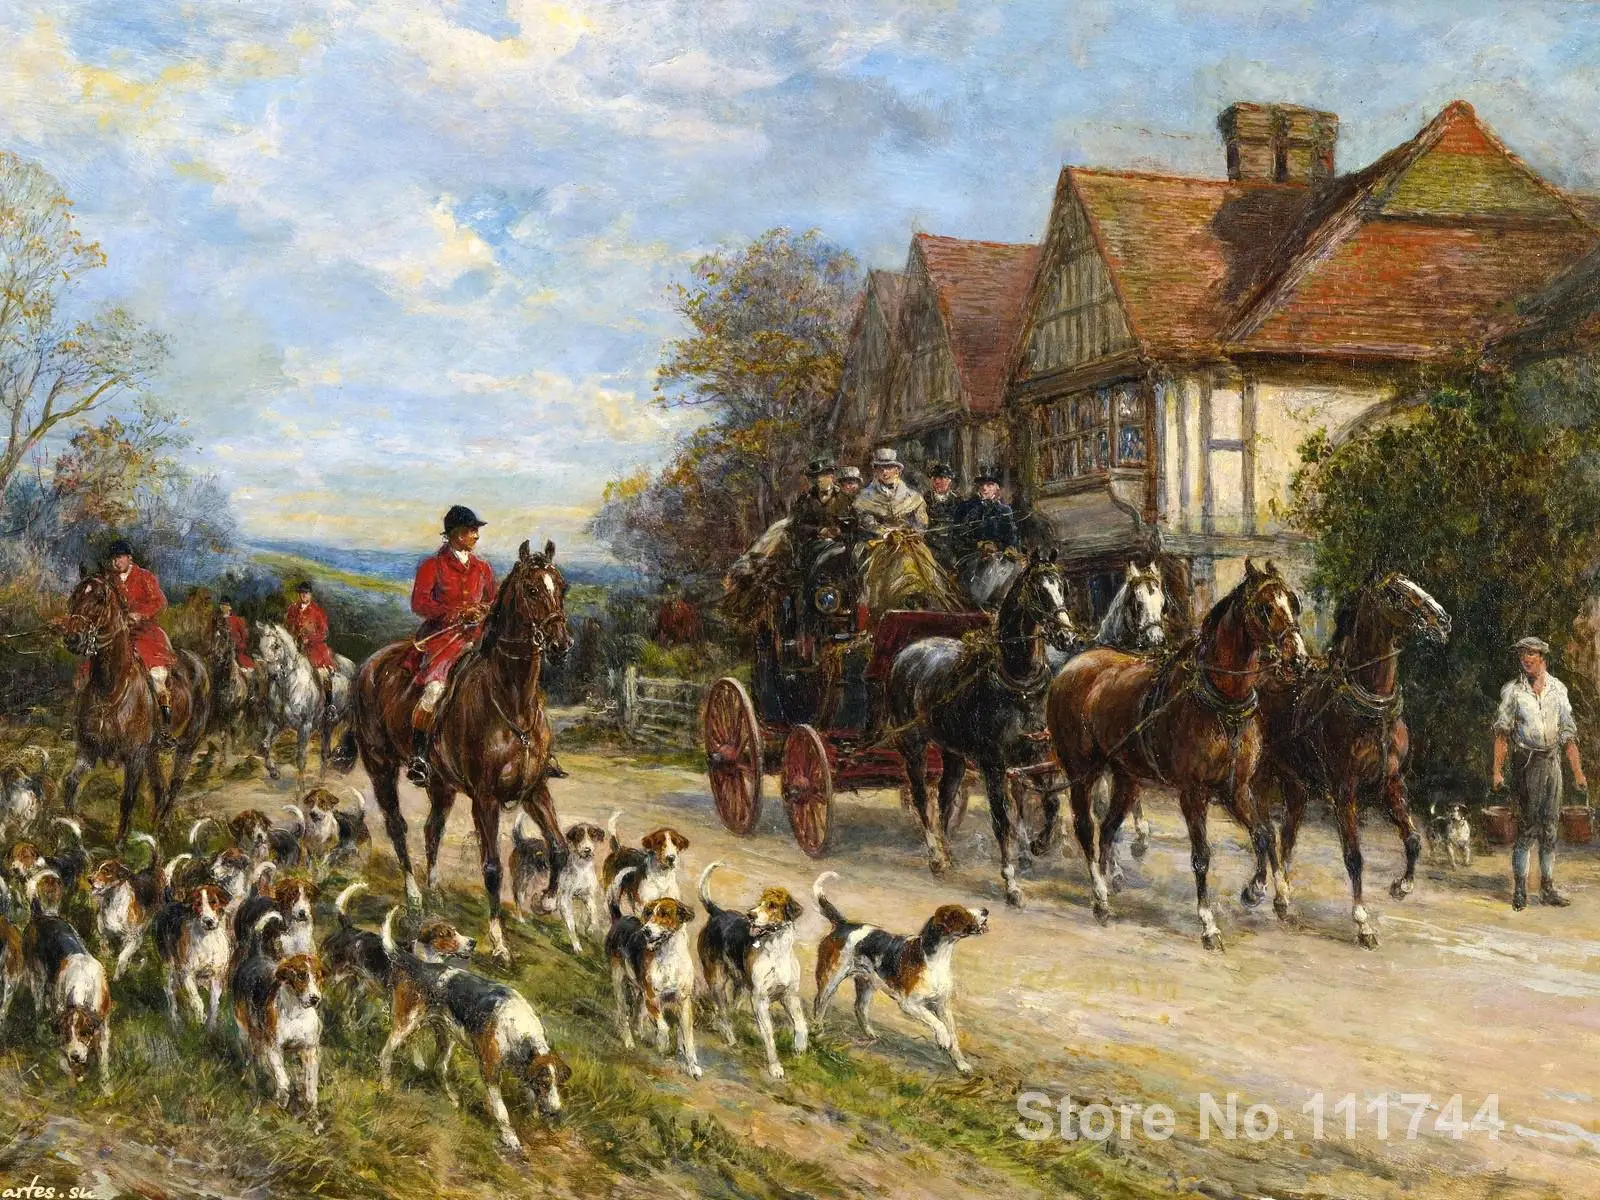 

Wall Decor Art Paintings by Heywood Hardy hunting dogs horses Landscape artwork High quality Hand painted